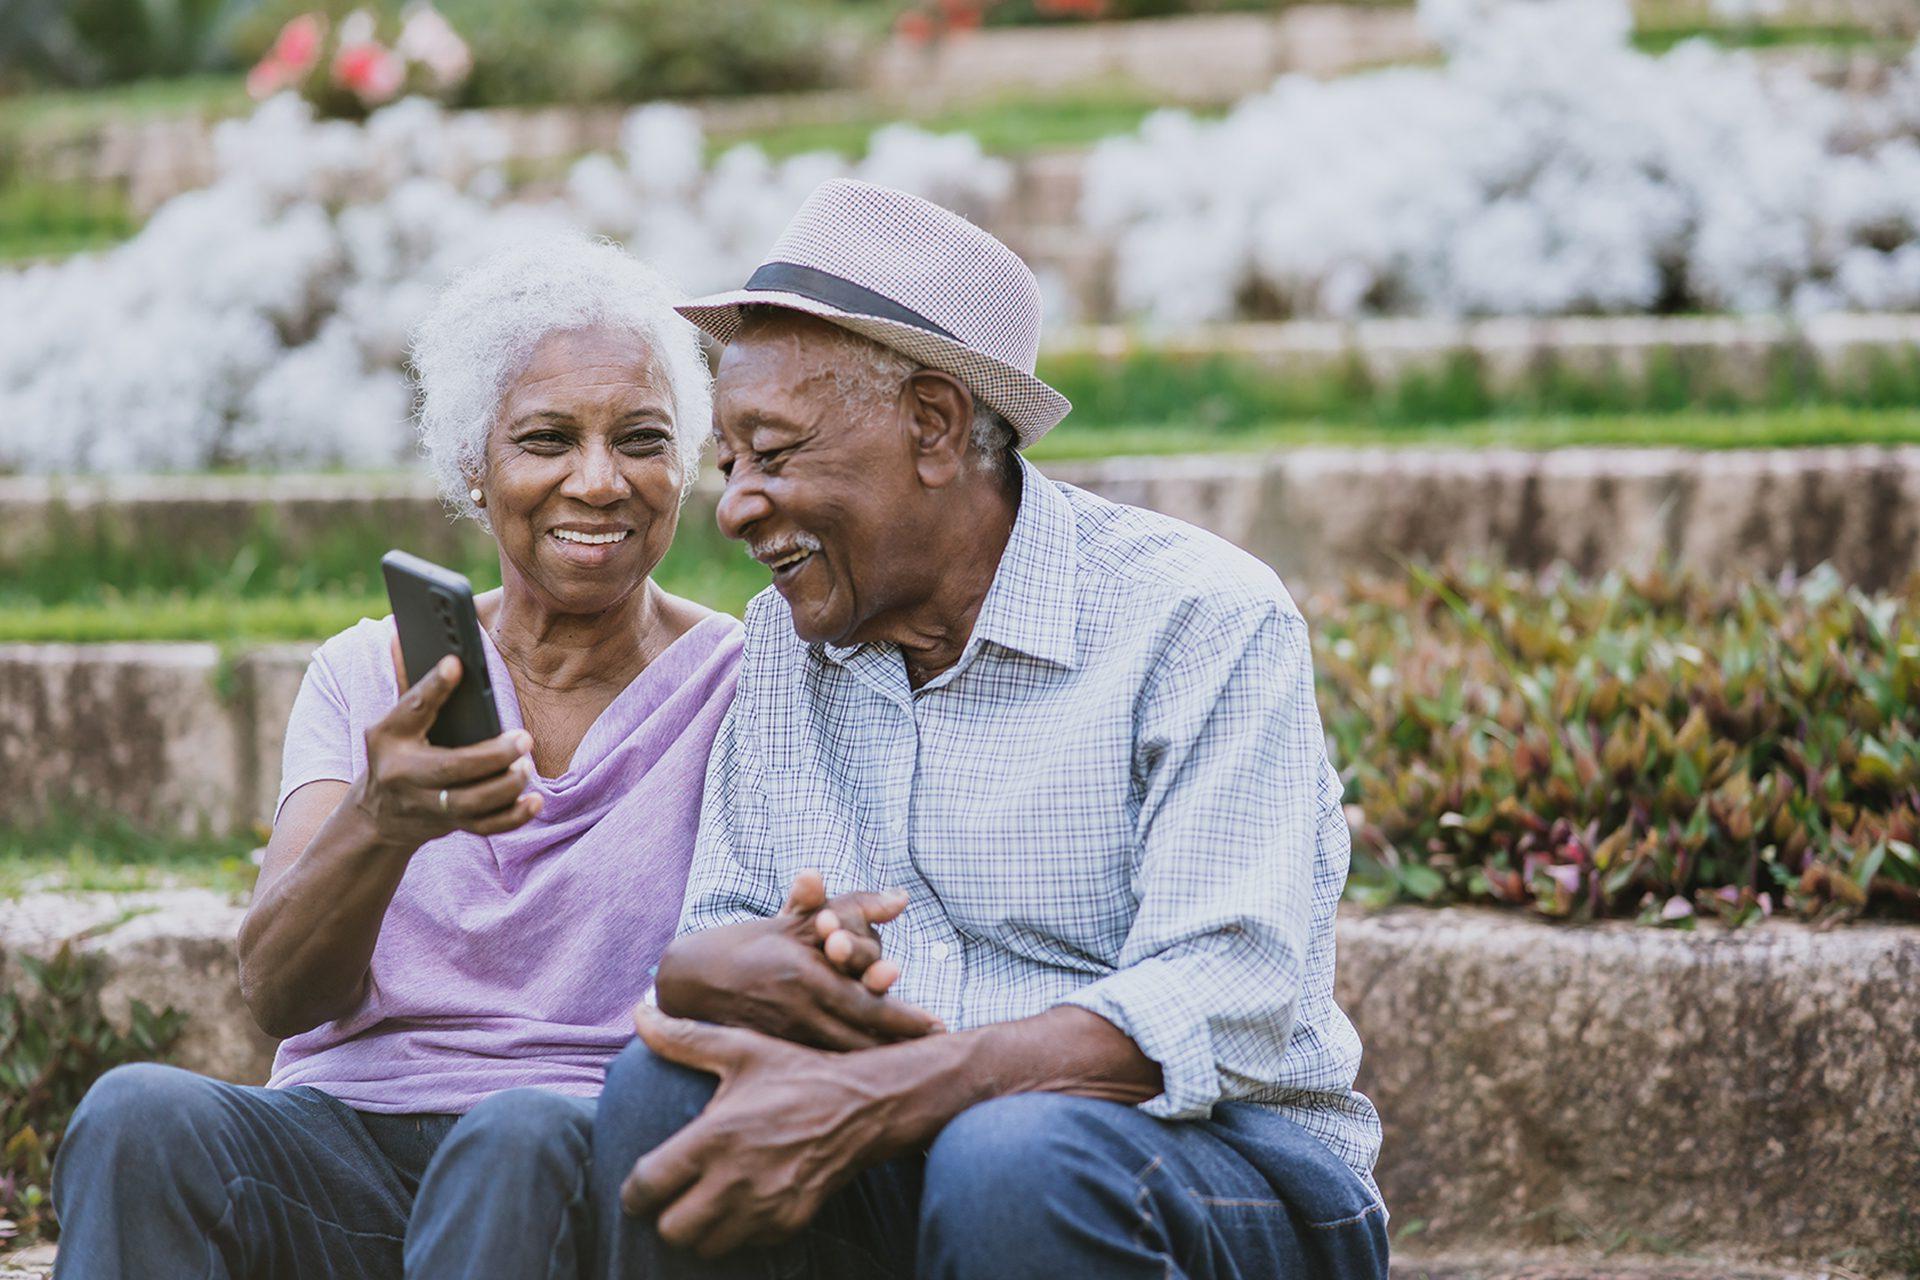 Older adults looking at cell phone